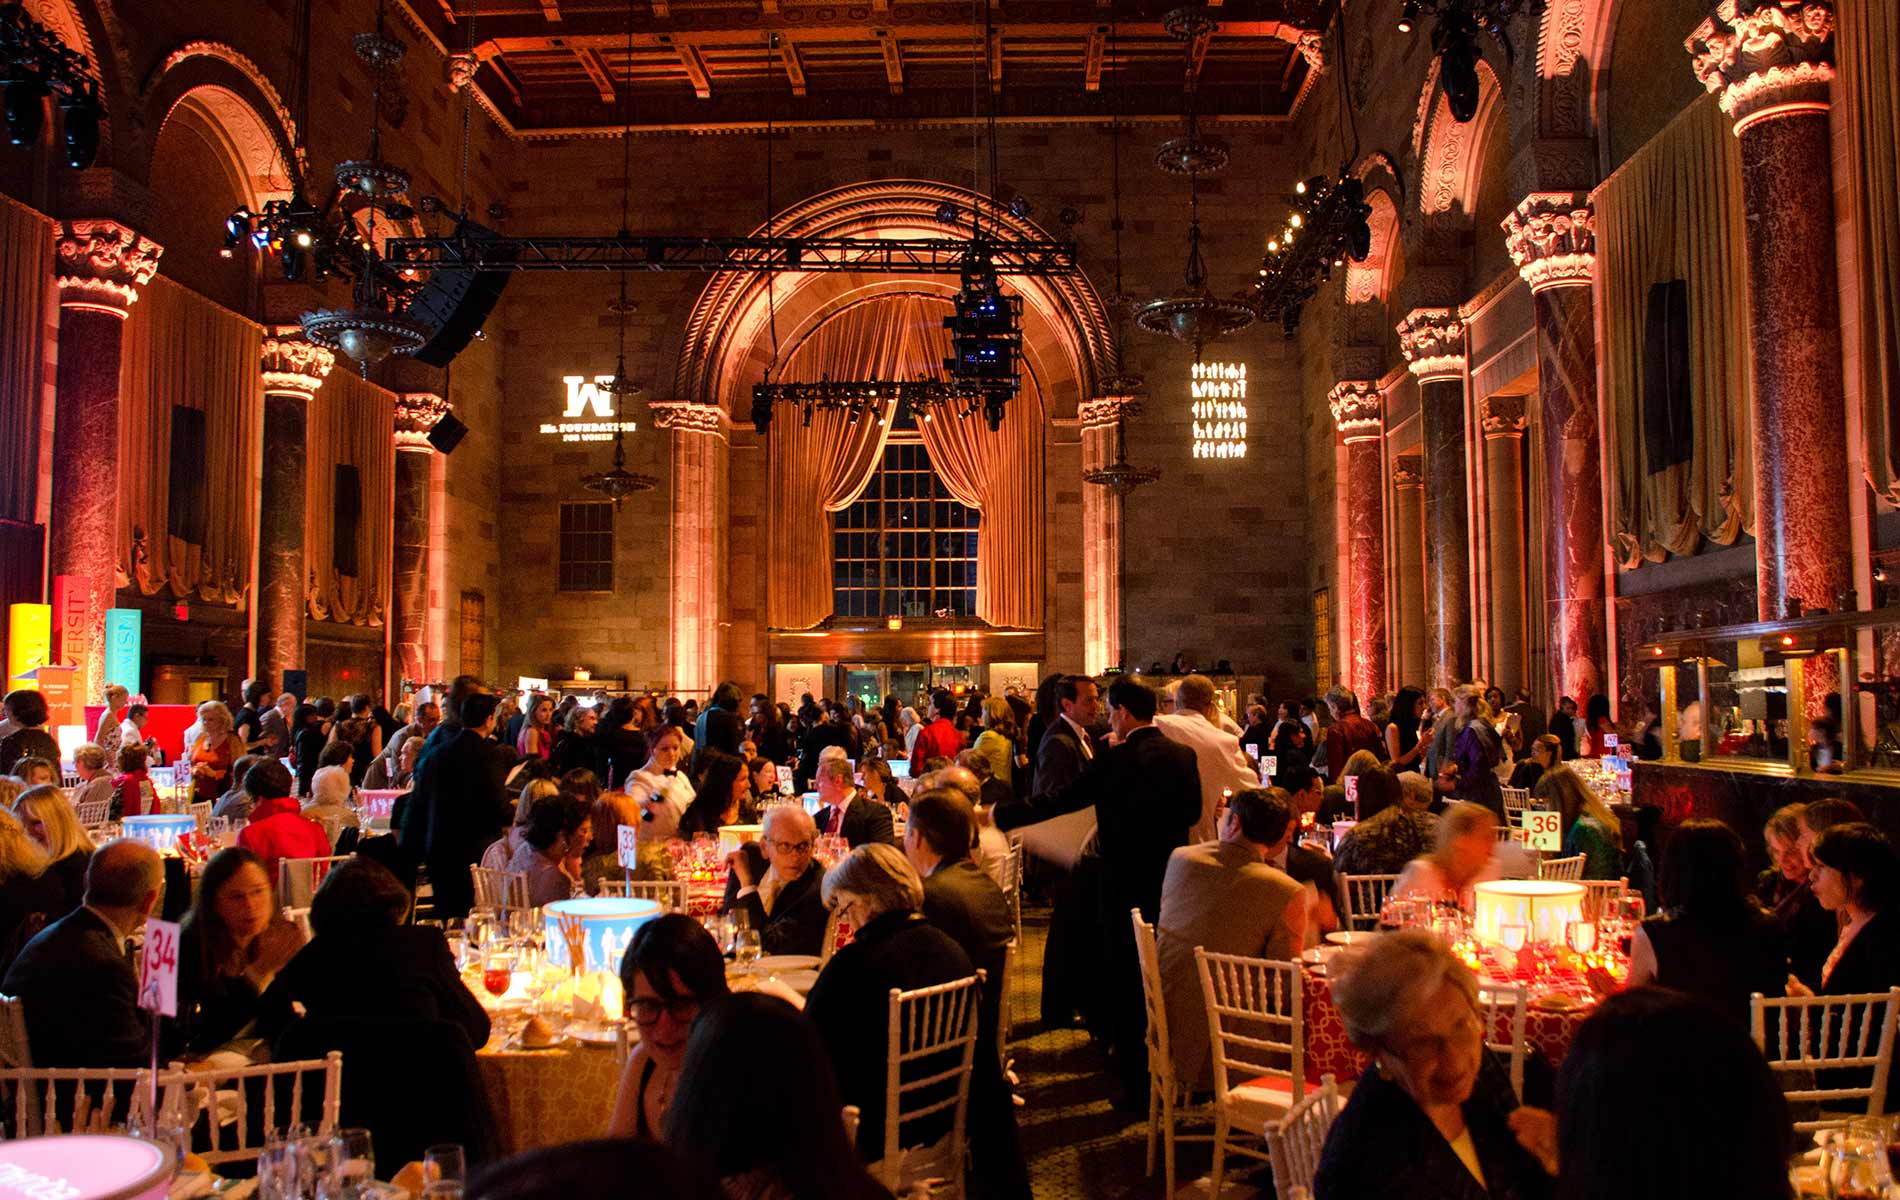 Twenty-Fifth Annual Gloria Awards banquet in the spectacular grand hall of Cipriani 42nd Street